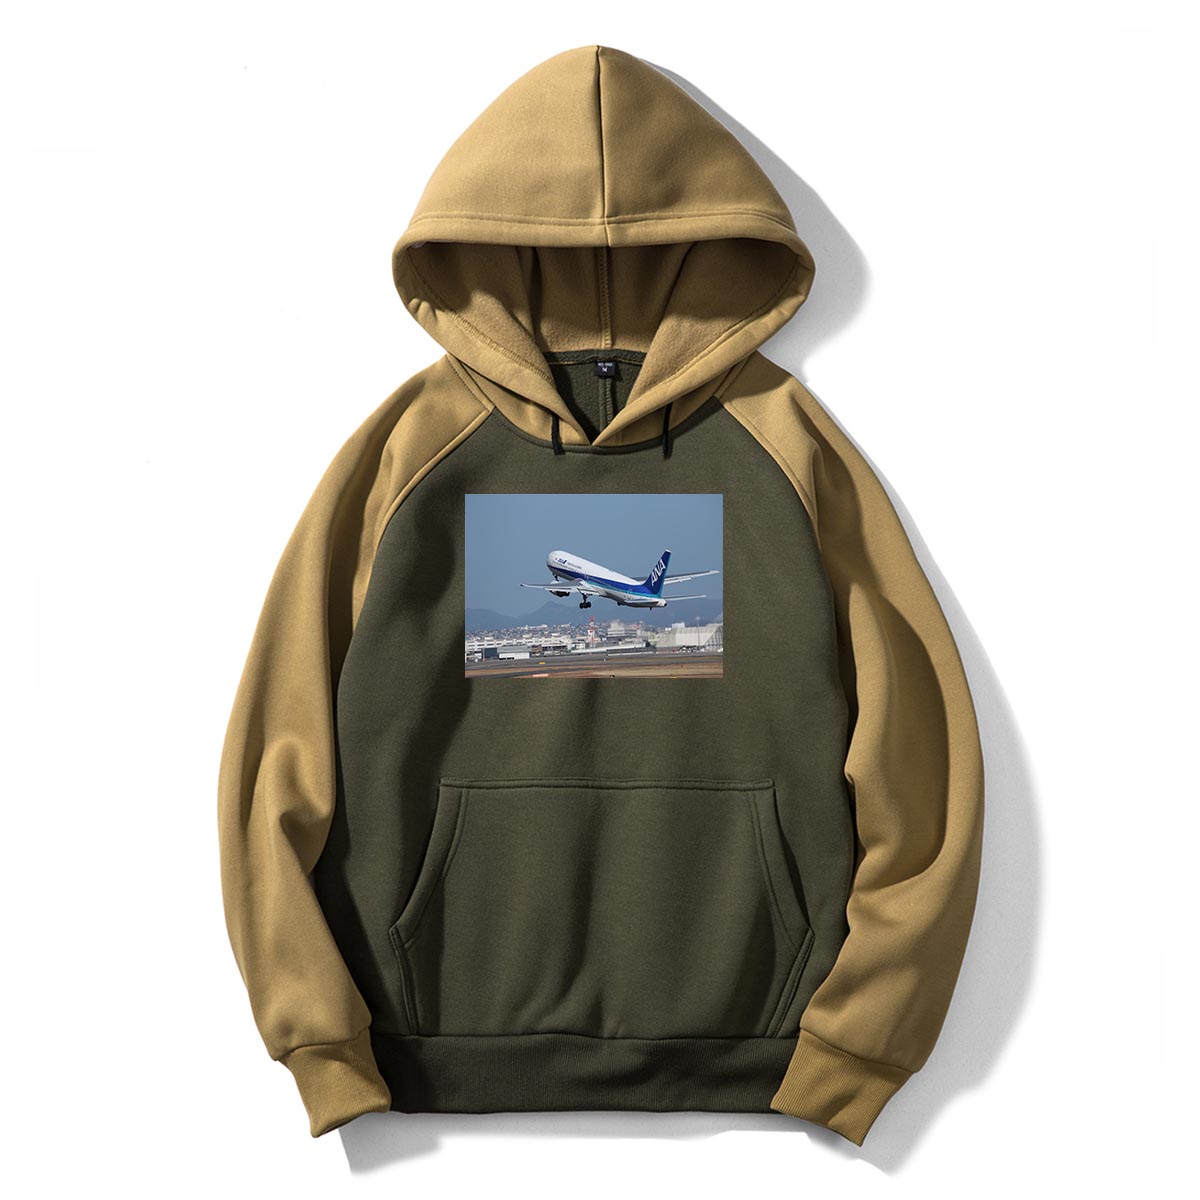 Departing ANA's Boeing 767 Designed Colourful Hoodies